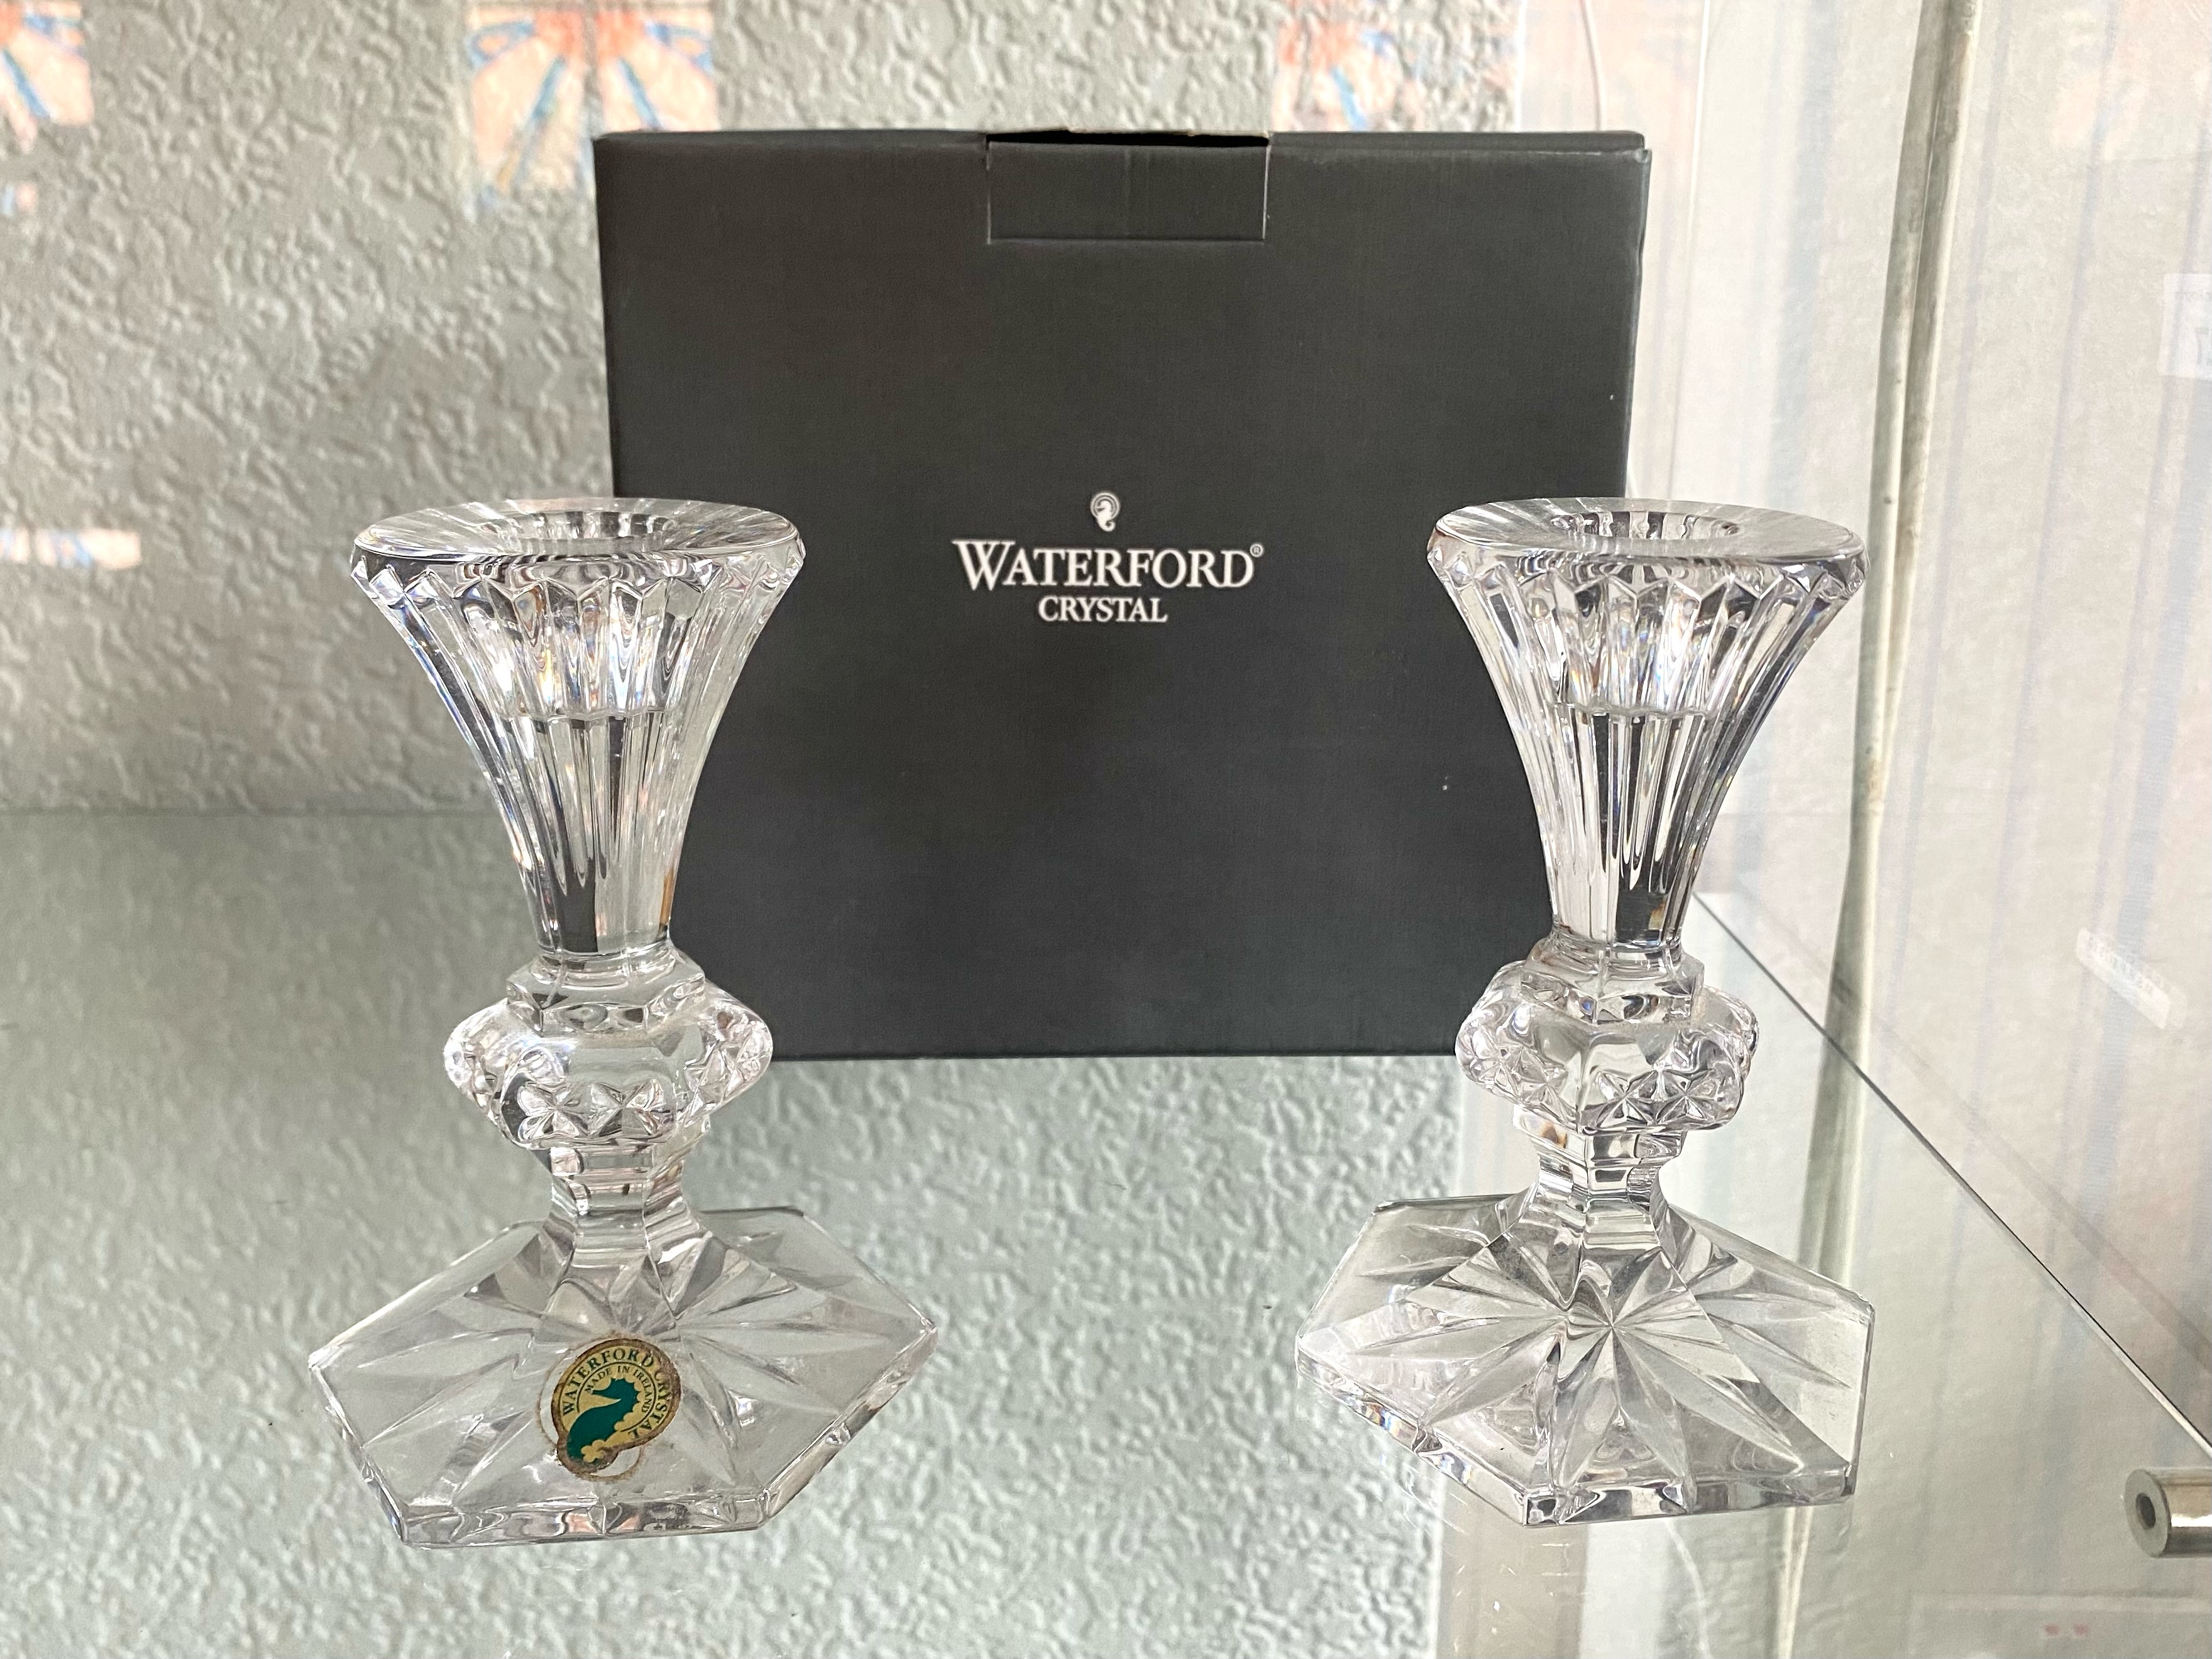 A Pair of Waterford Crystal Candlesticks, in original box, measure 5'' high.